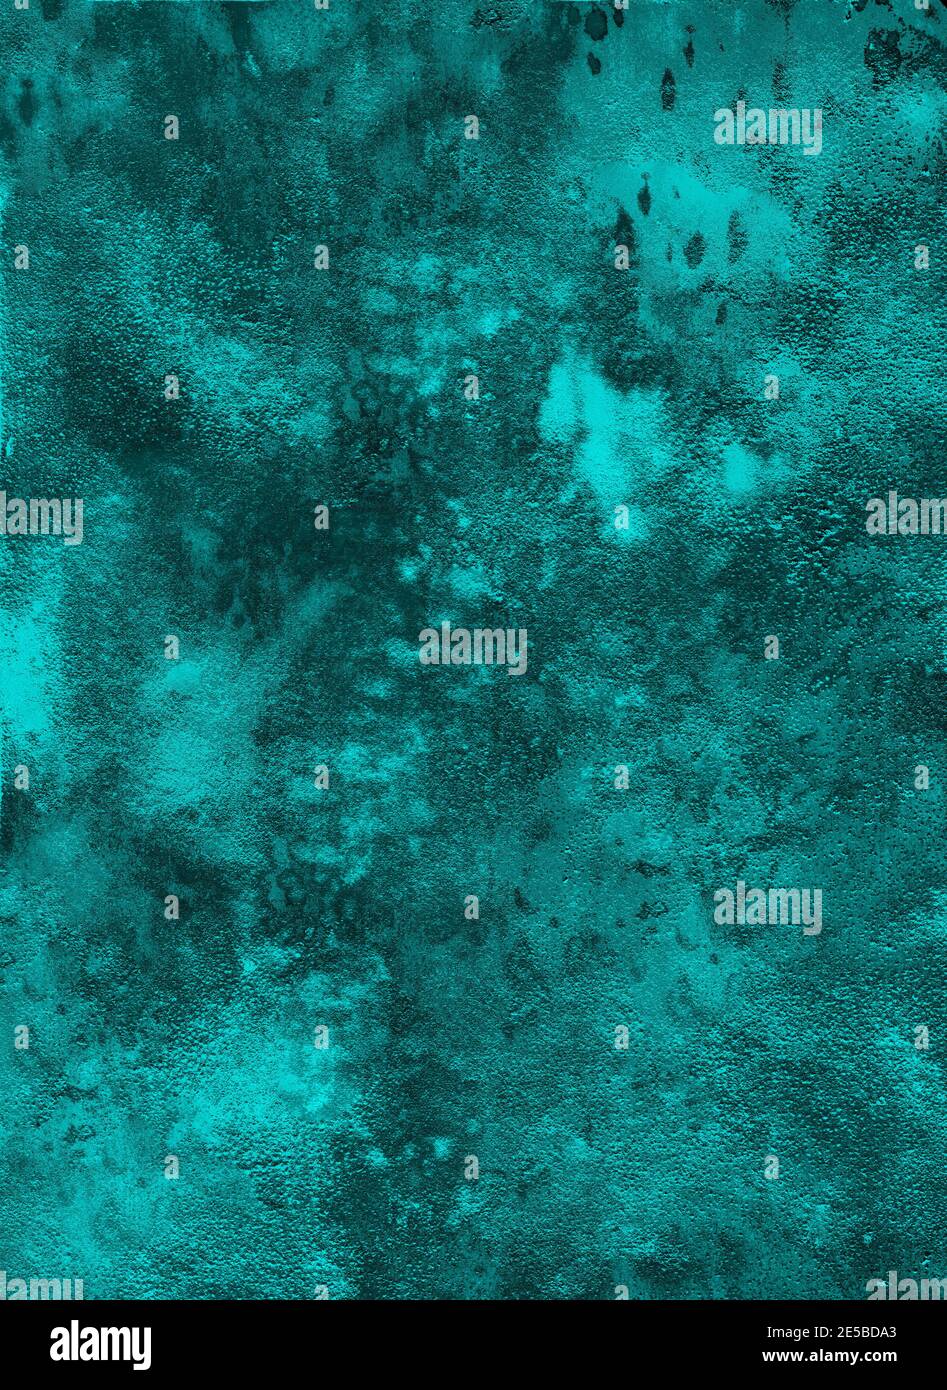 Background, watercolor texture emerald color, background with watercolor stains and granulation effect Stock Photo